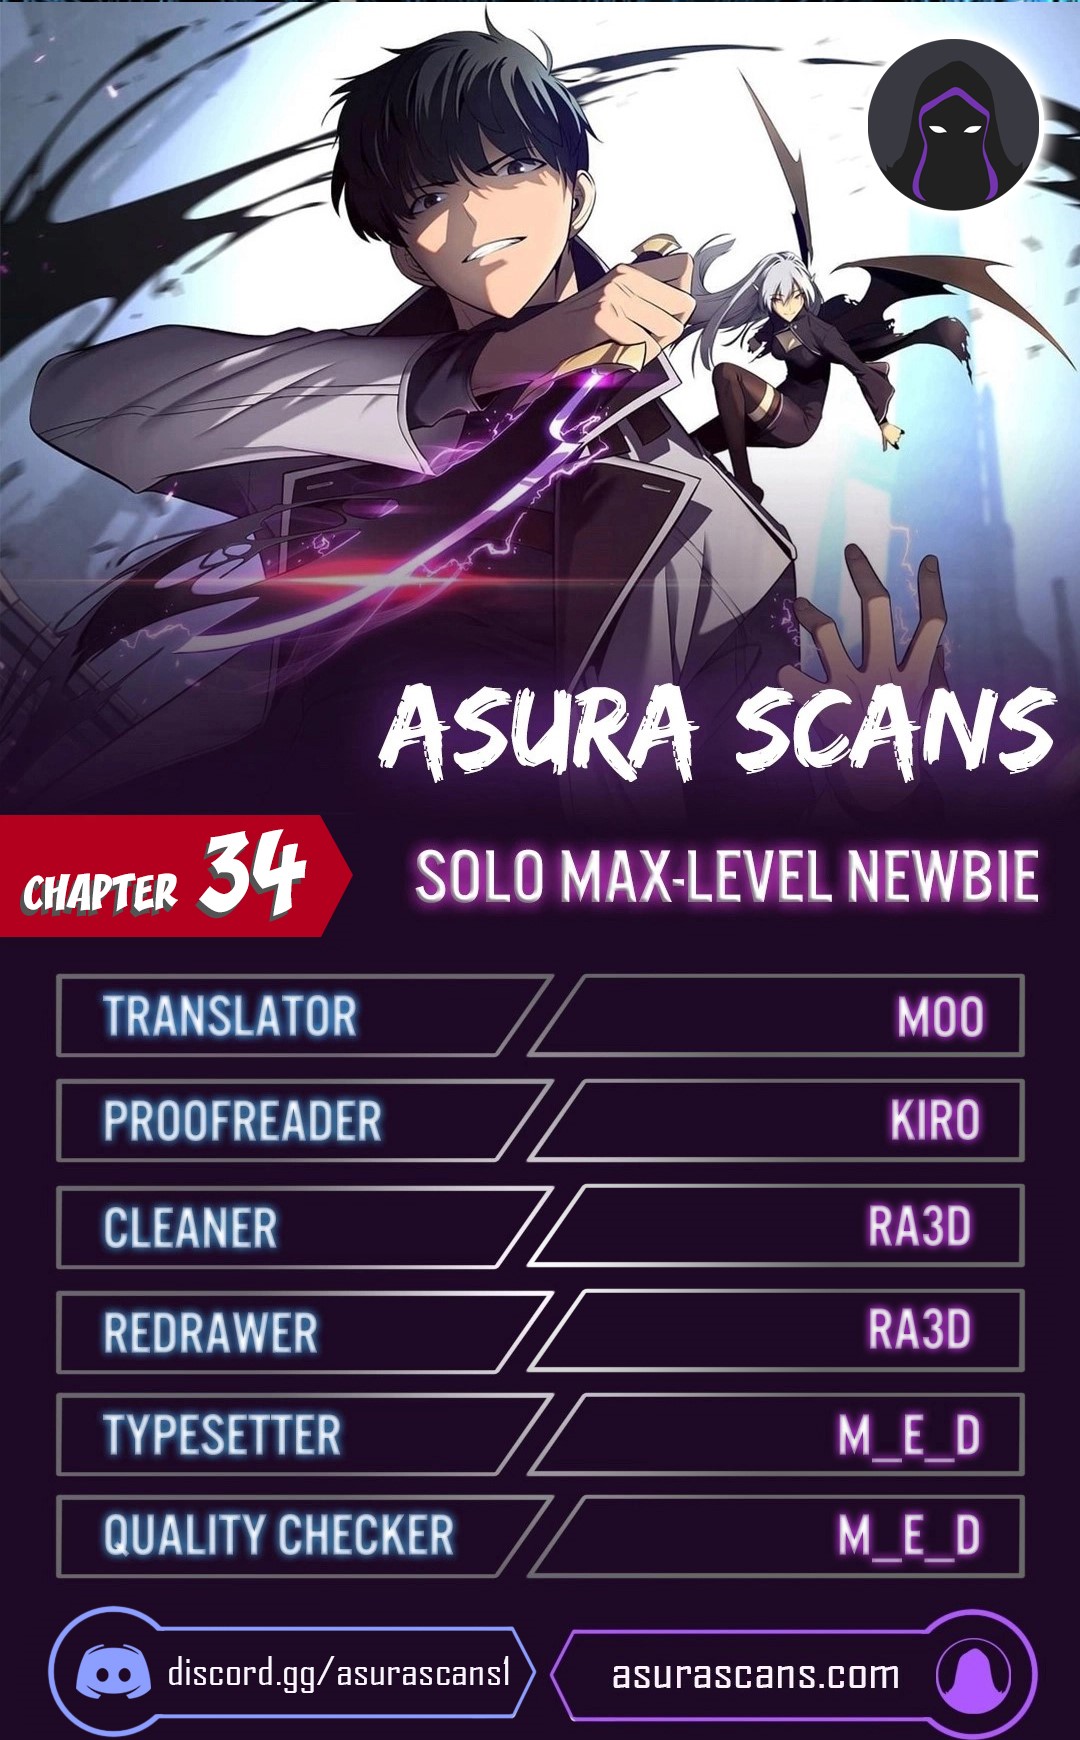 Solo Max-Level Newbie Chapter 34 – Asura Scans